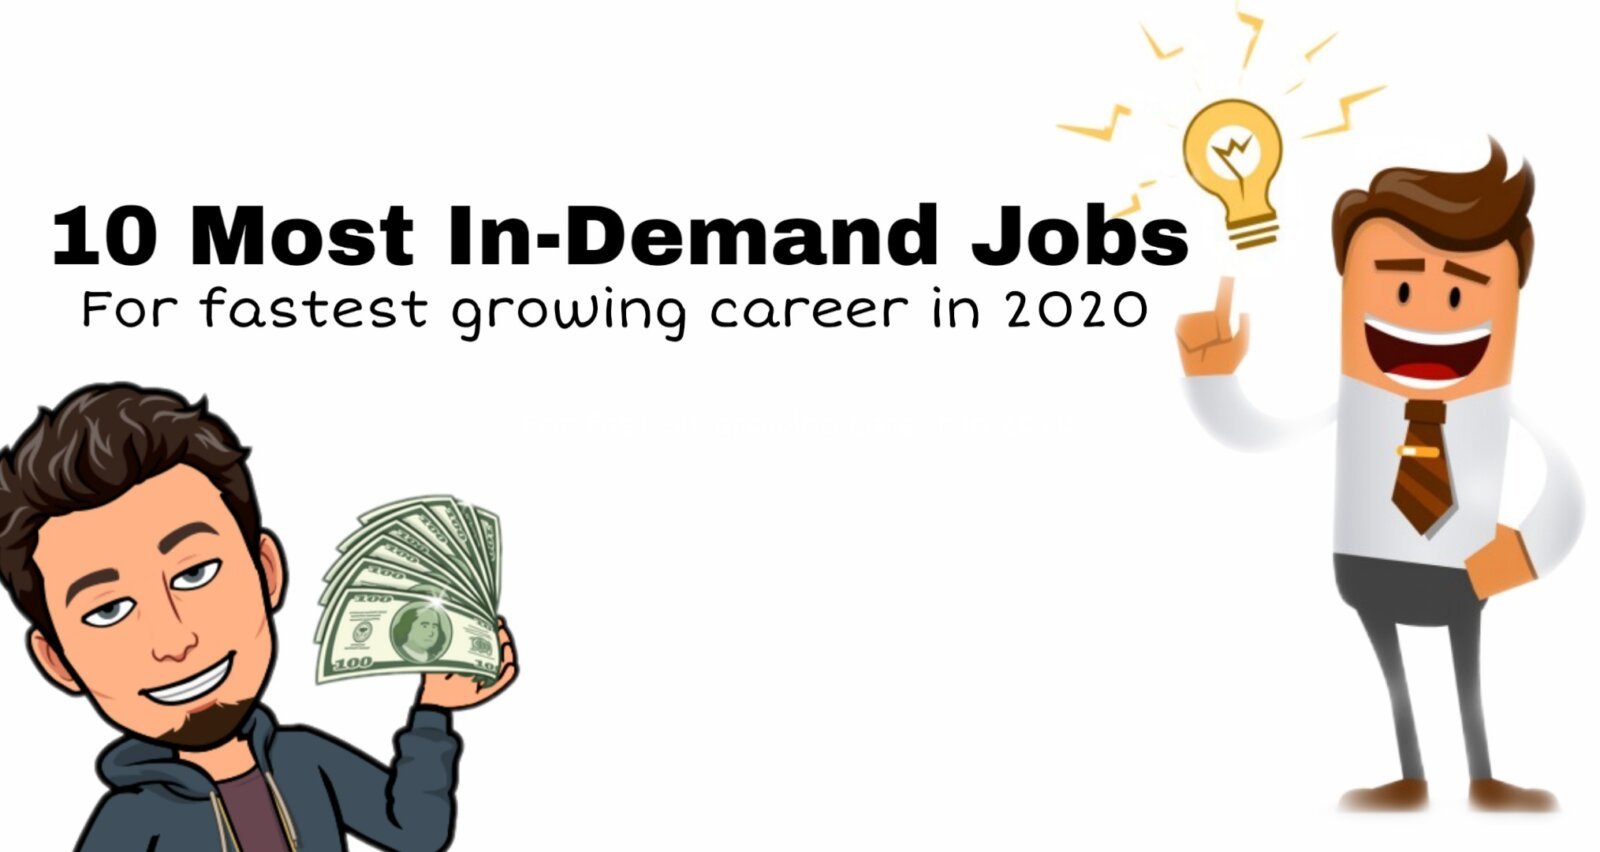 Top 10 Most In-Demand Jobs for fastest growing career in 2020